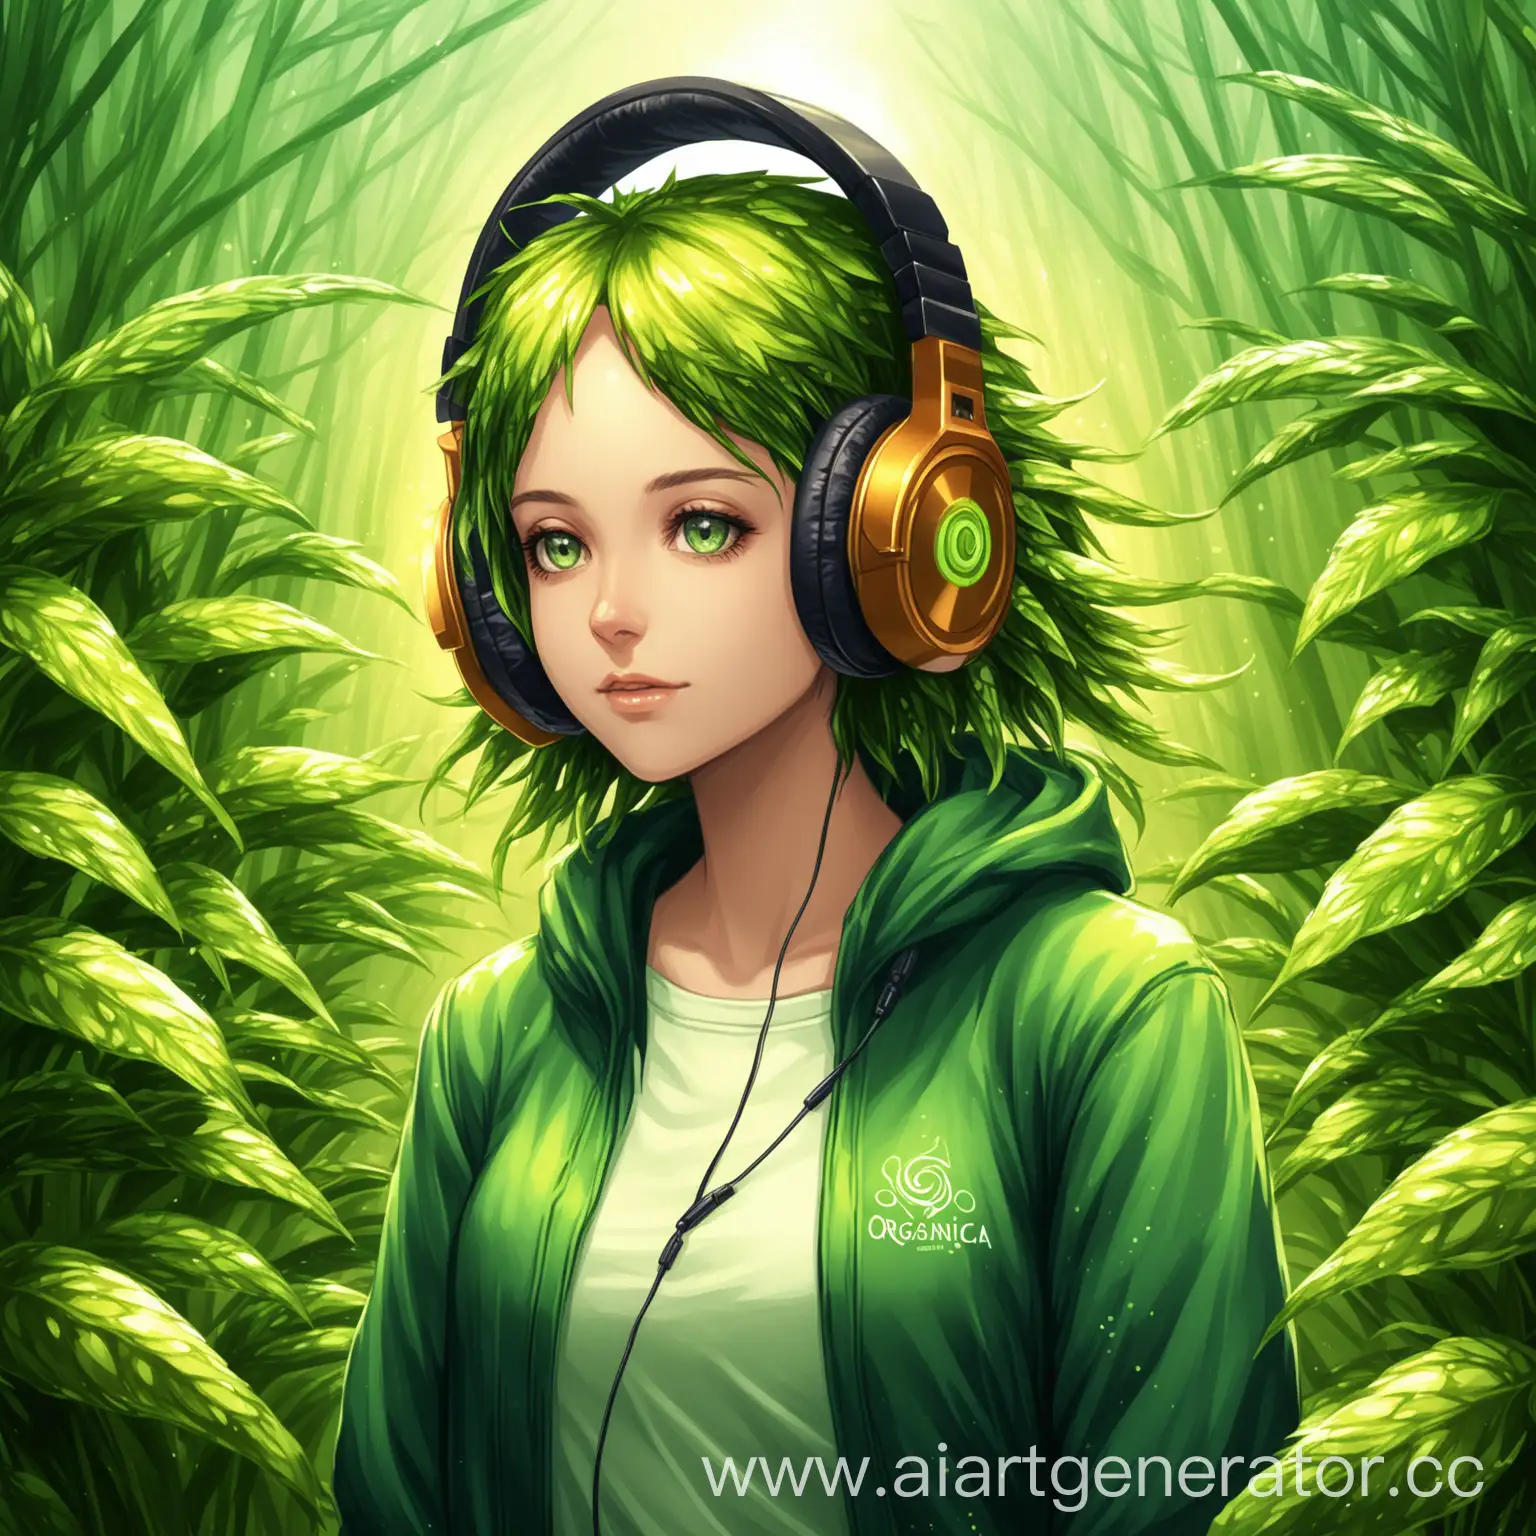 Young-Woman-Listening-to-Music-with-Organic-Headphones